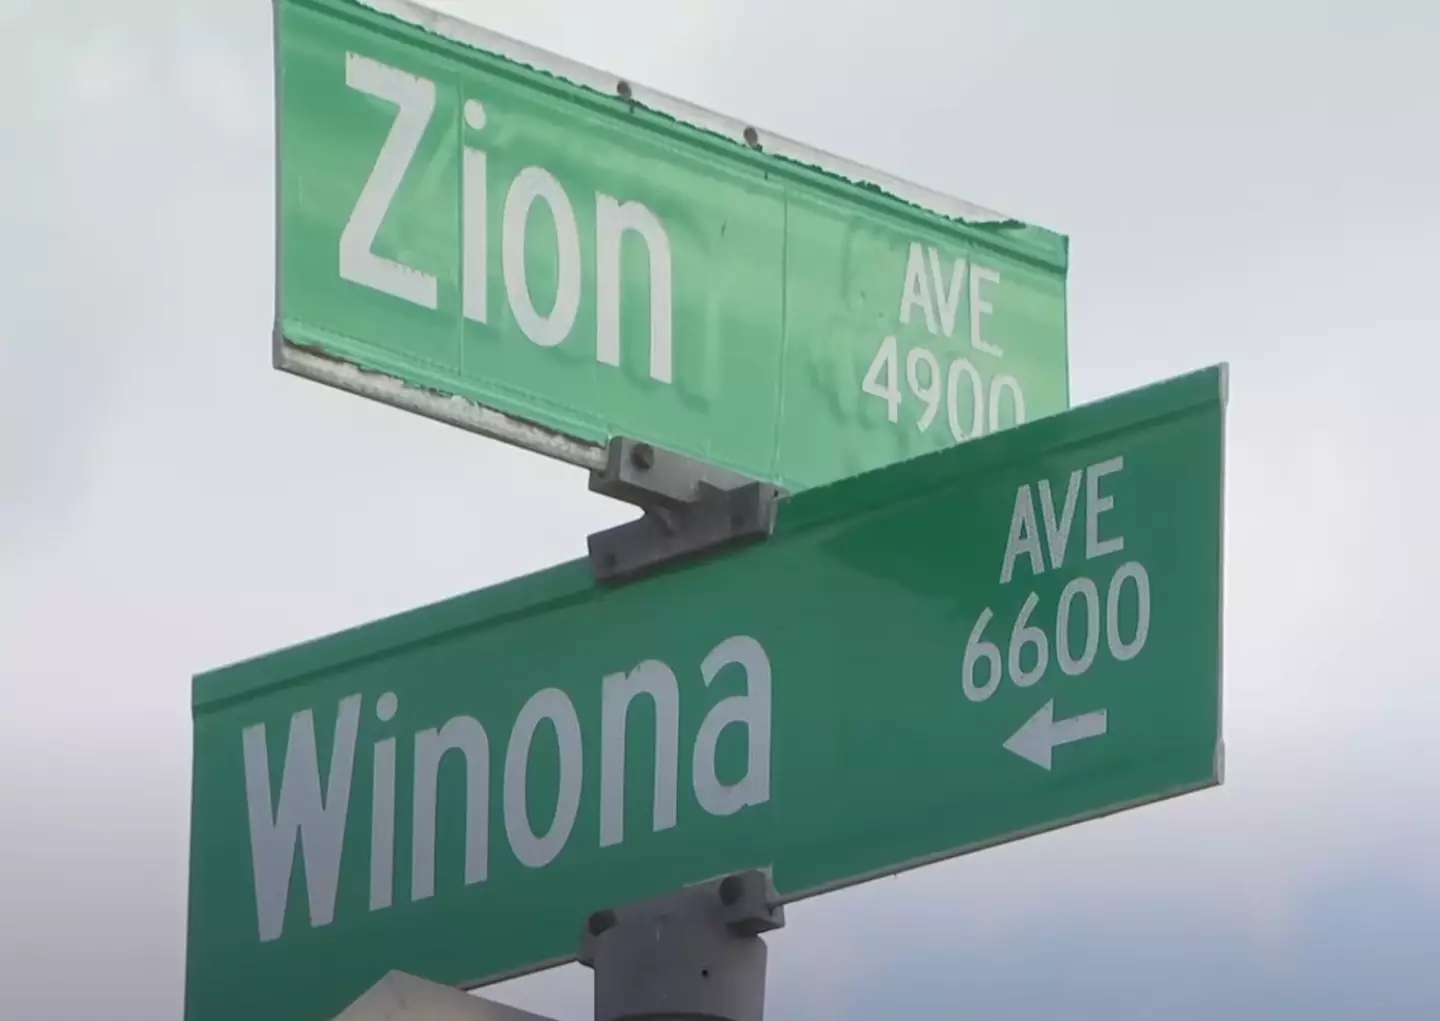 The house is on Zion Avenue.